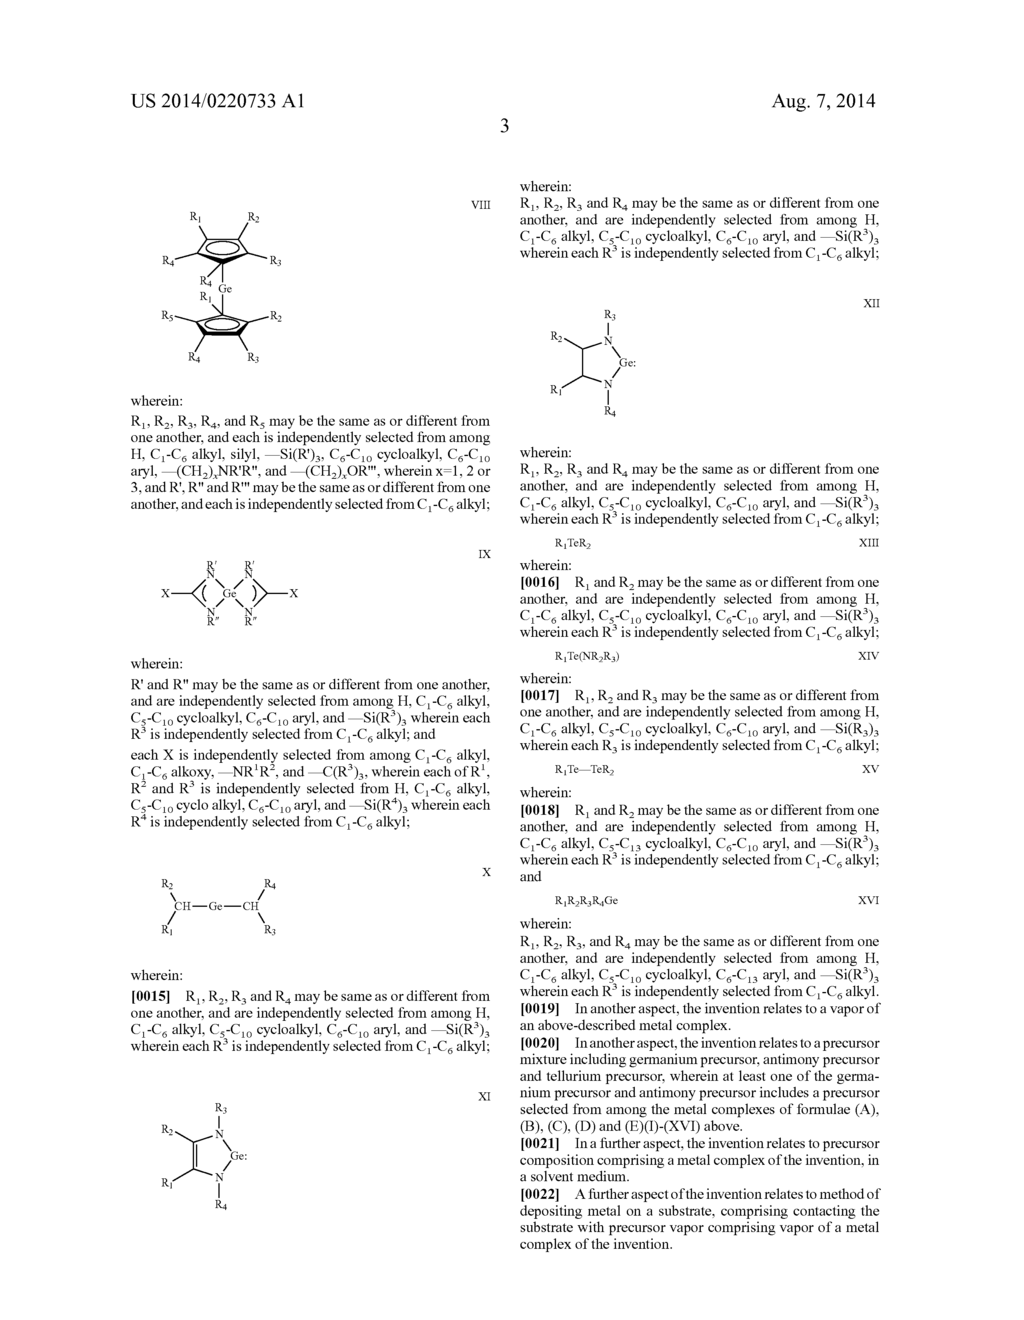 ANTIMONY AND GERMANIUM COMPLEXES USEFUL FOR CVD/ALD OF METAL THIN FILMS - diagram, schematic, and image 09